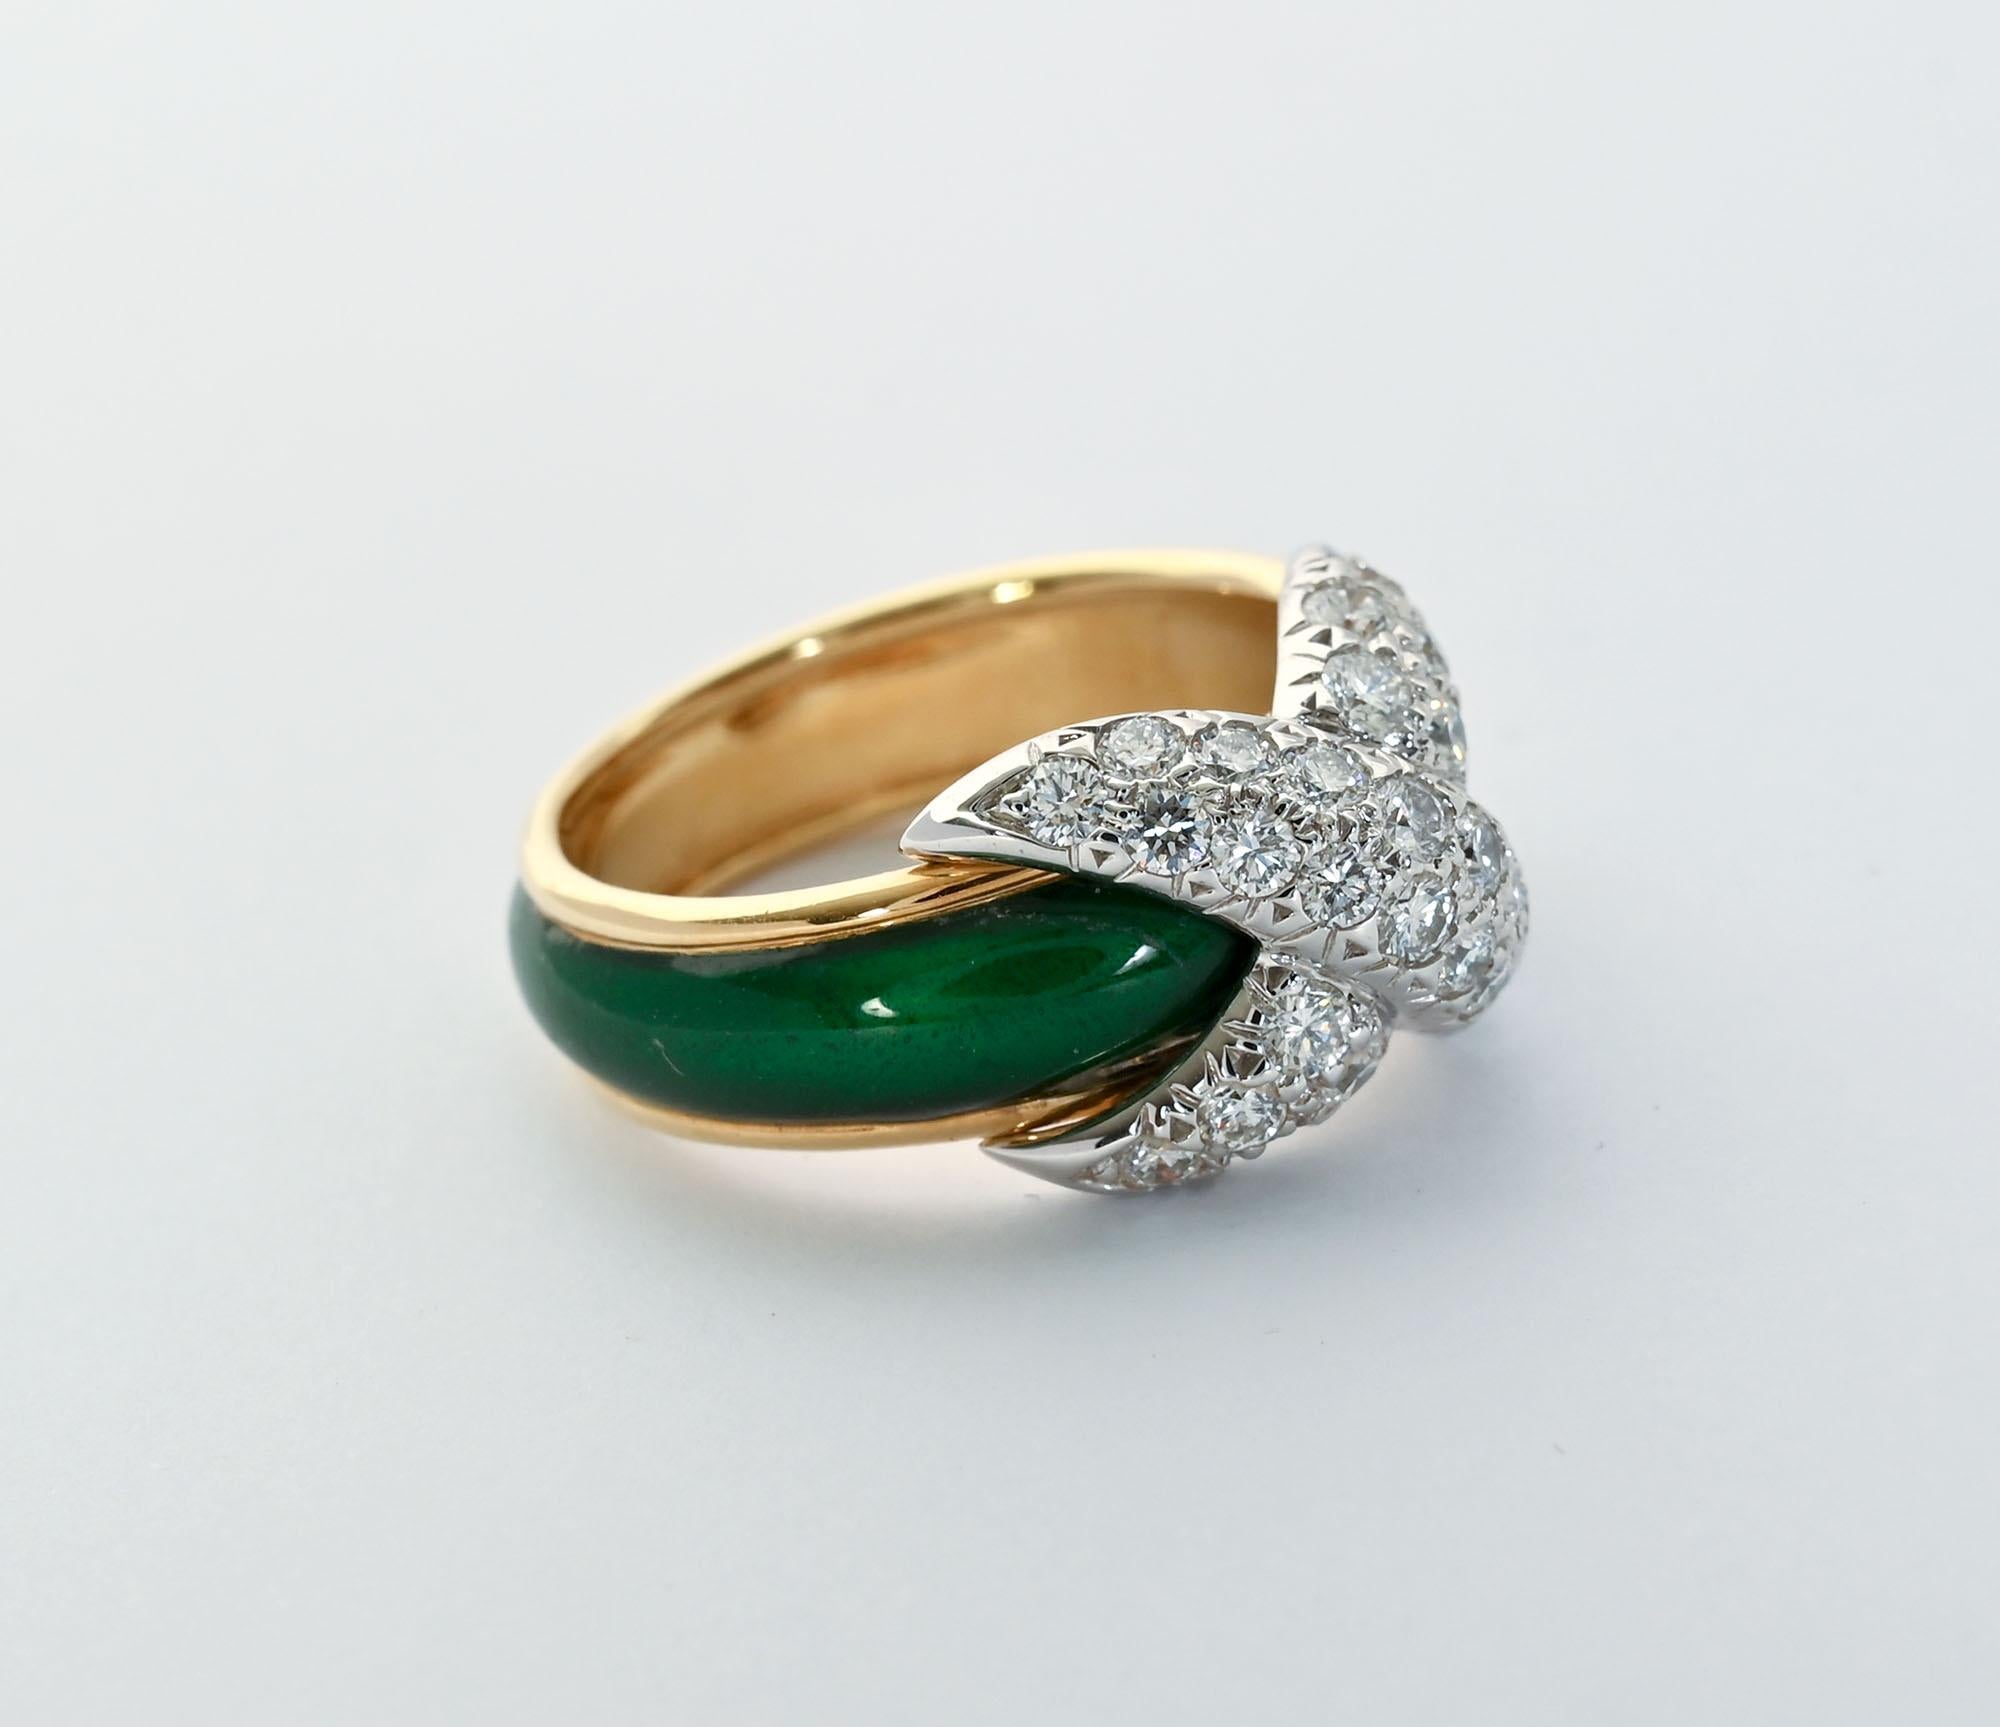 Elegant pave X ring by Schlumberger for Tiffany. The green enamel is in excellent condition. The ring is size 6 3/4. The front is 3/8 